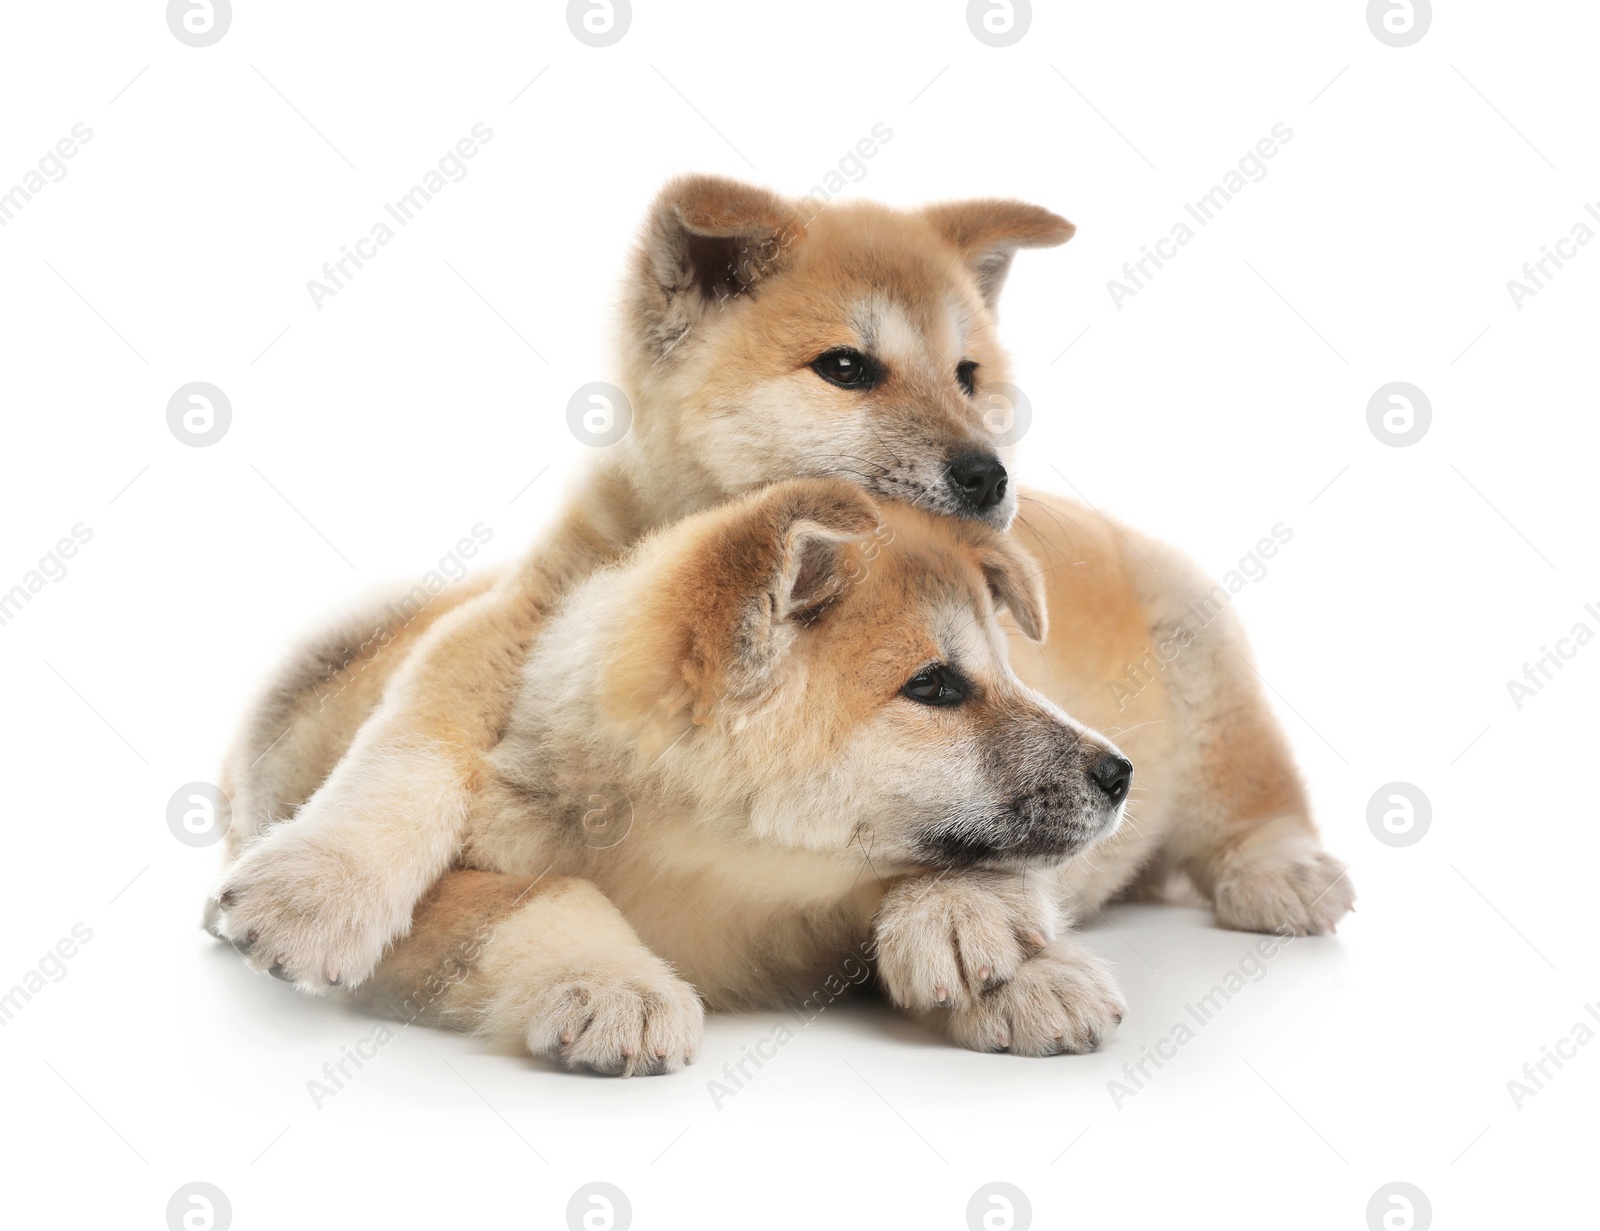 Photo of Adorable Akita Inu puppies on white background